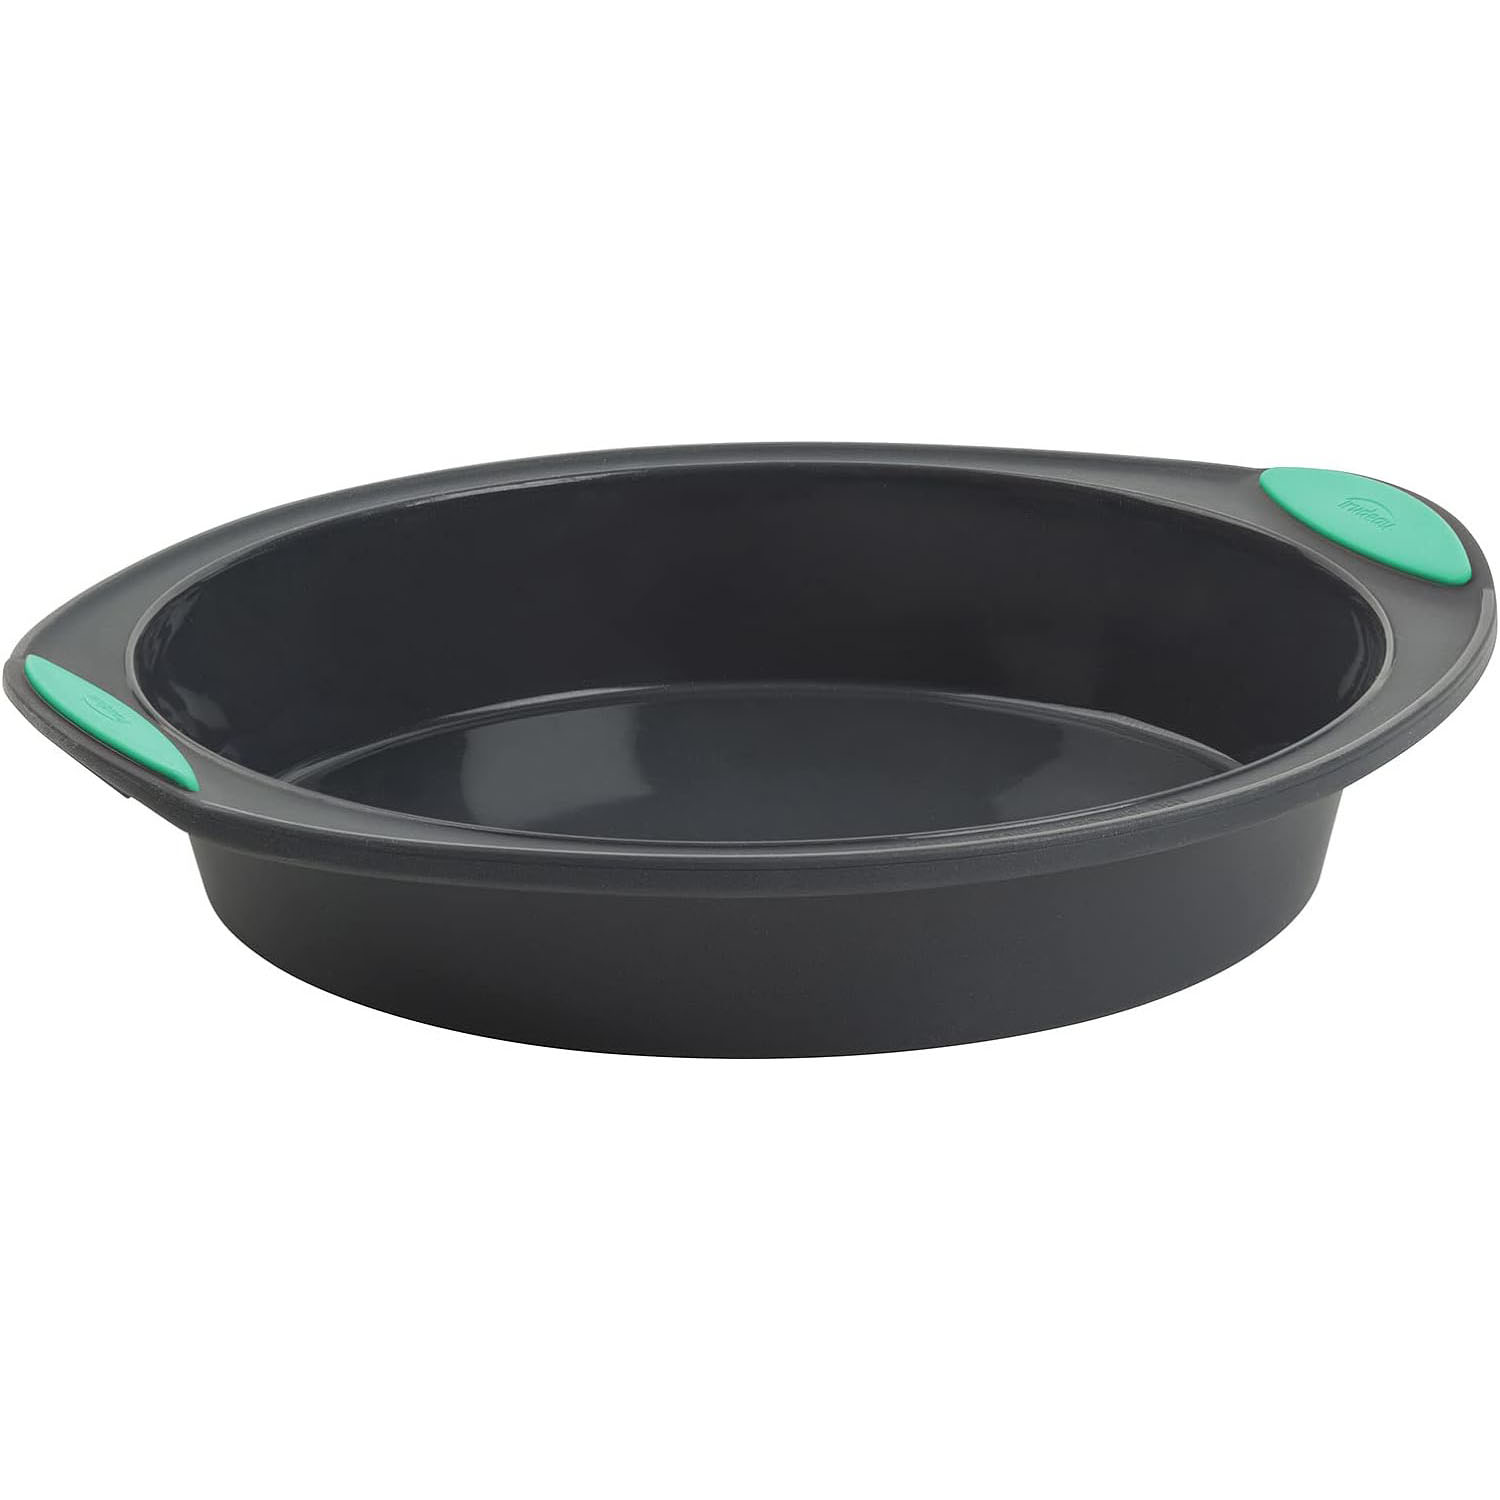 Trudeau Round Silicone Cake Pan, 9 inch